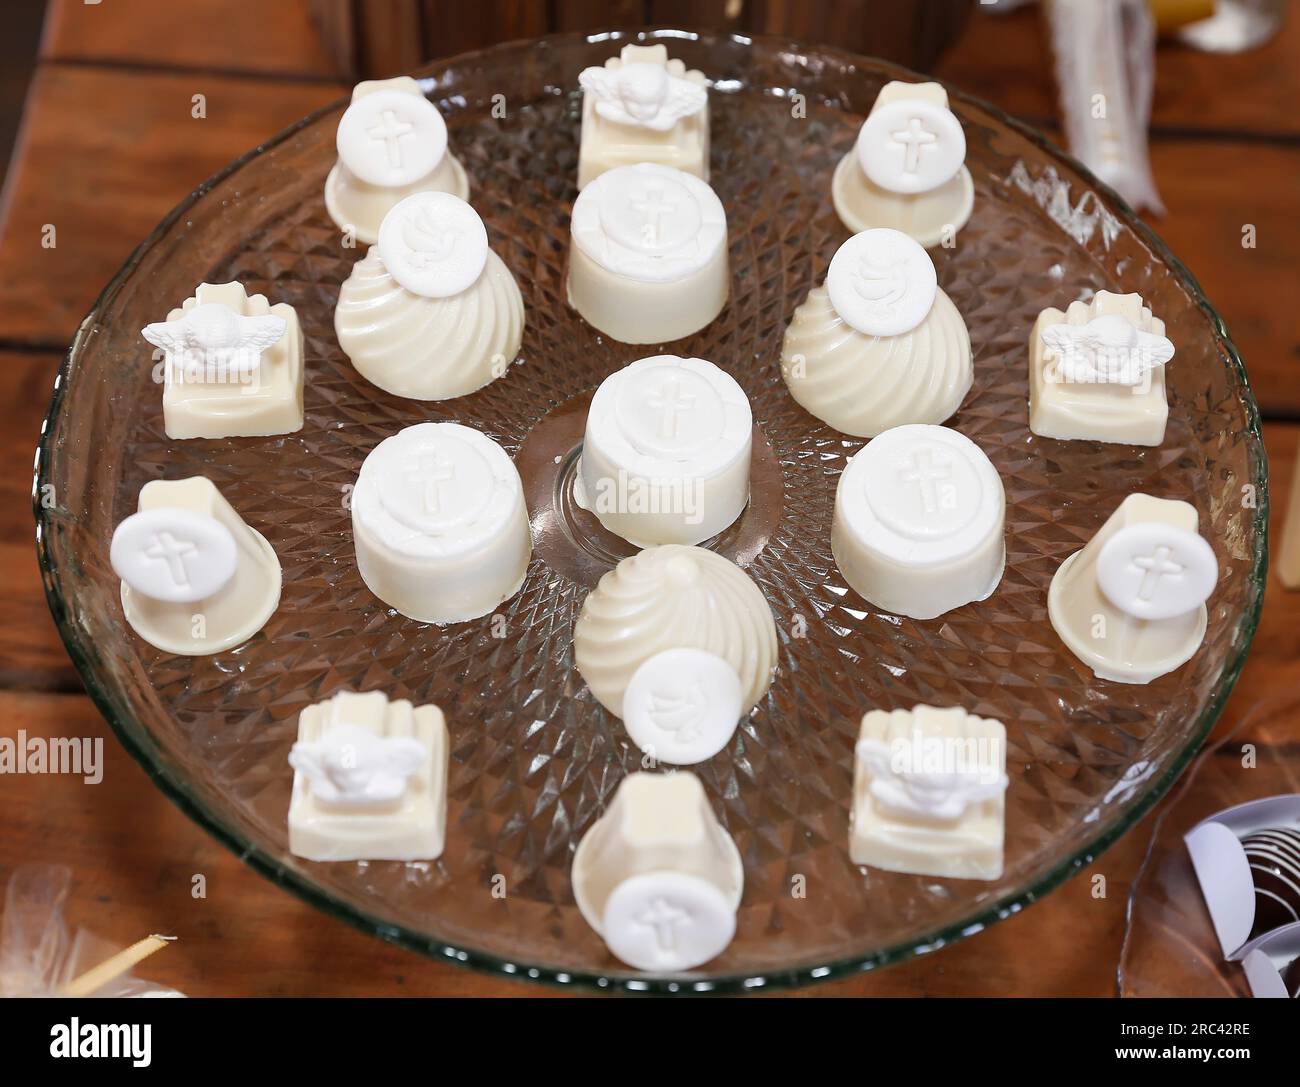 Delicious Party Candy, Celebration Candy, Reception Food Stock Photo